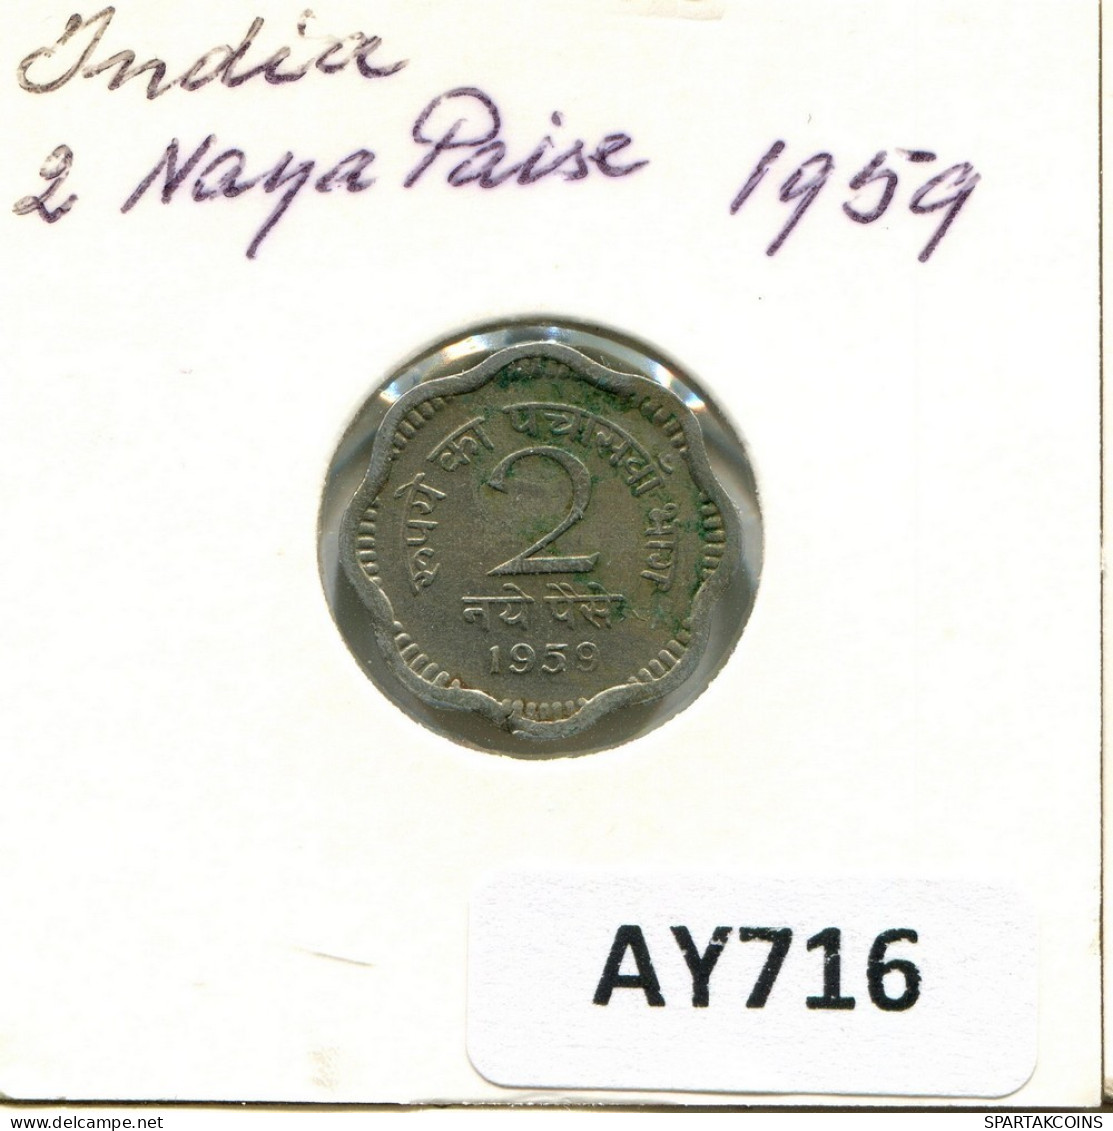 2 PAISE 1959 INDE INDIA Pièce #AY716.F.A - Indien